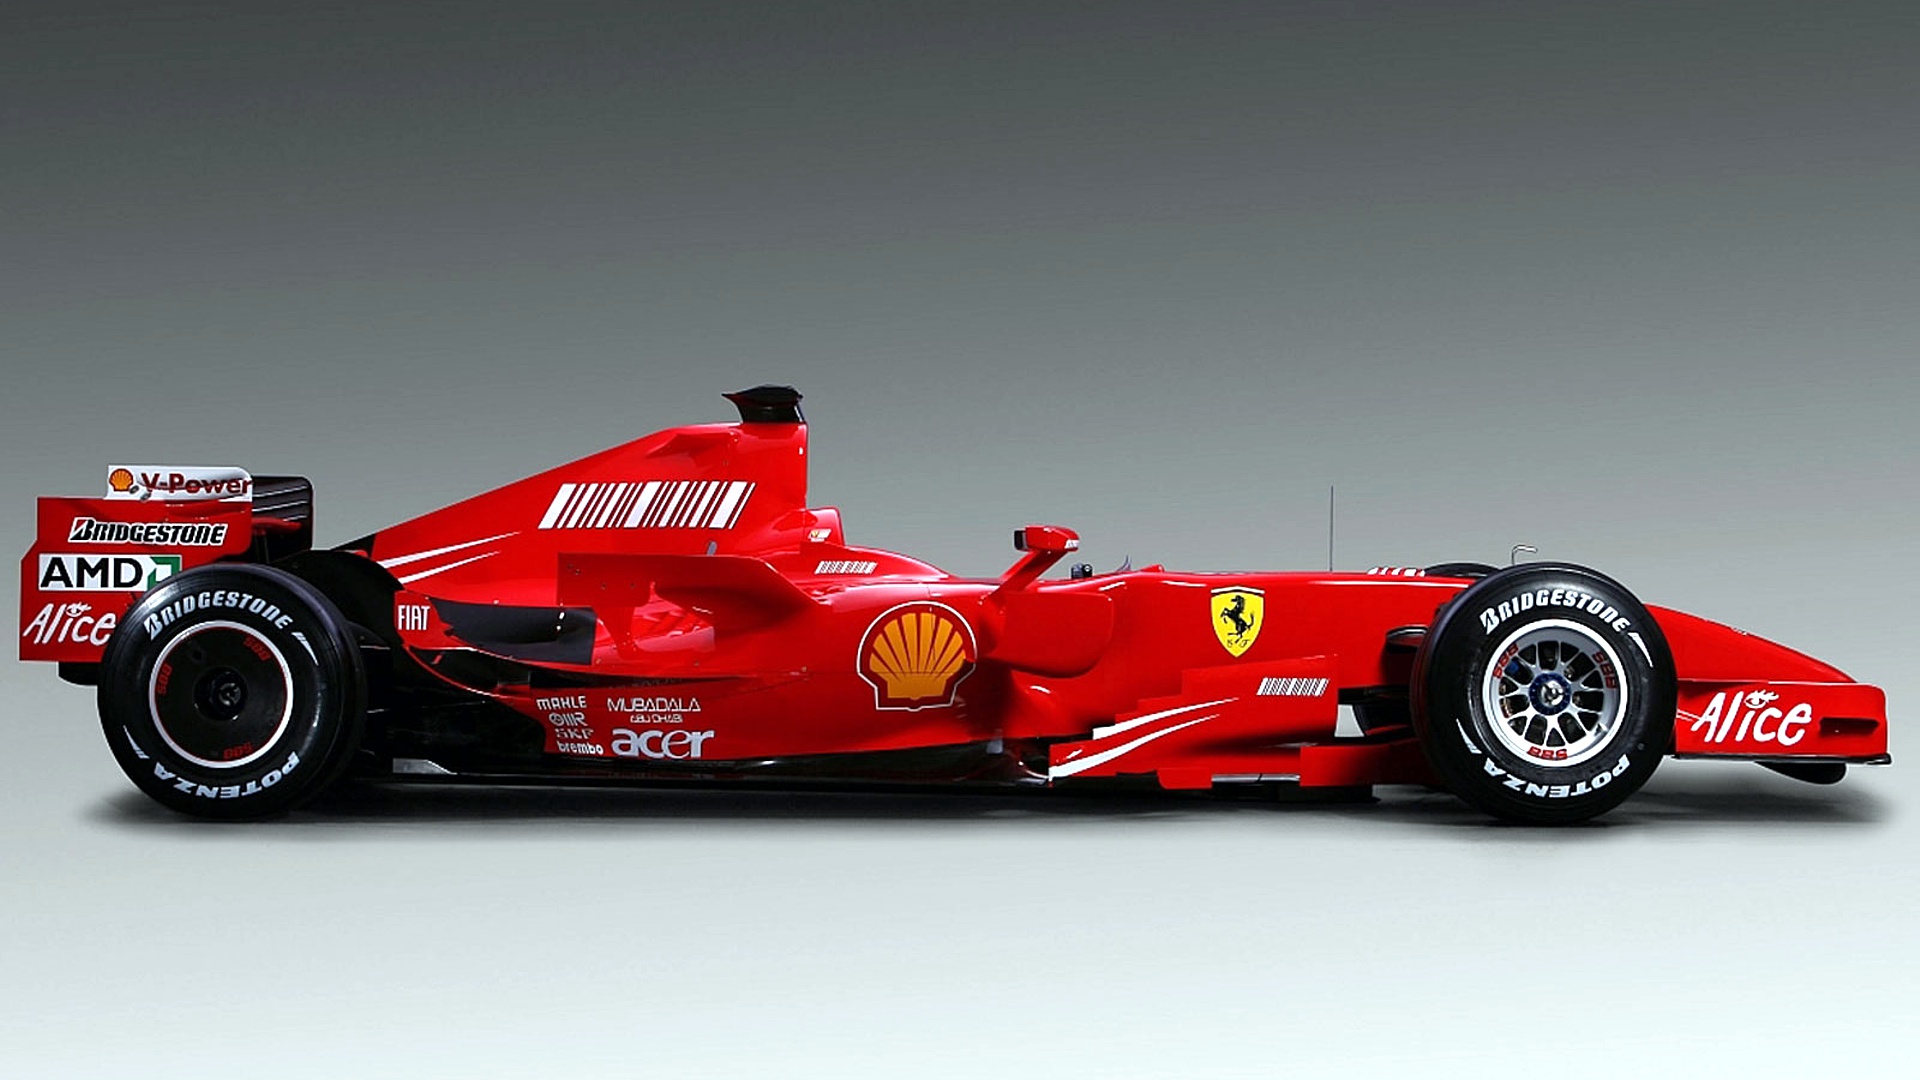 HD Wallpaper Background For Your Desktop F1 Cars